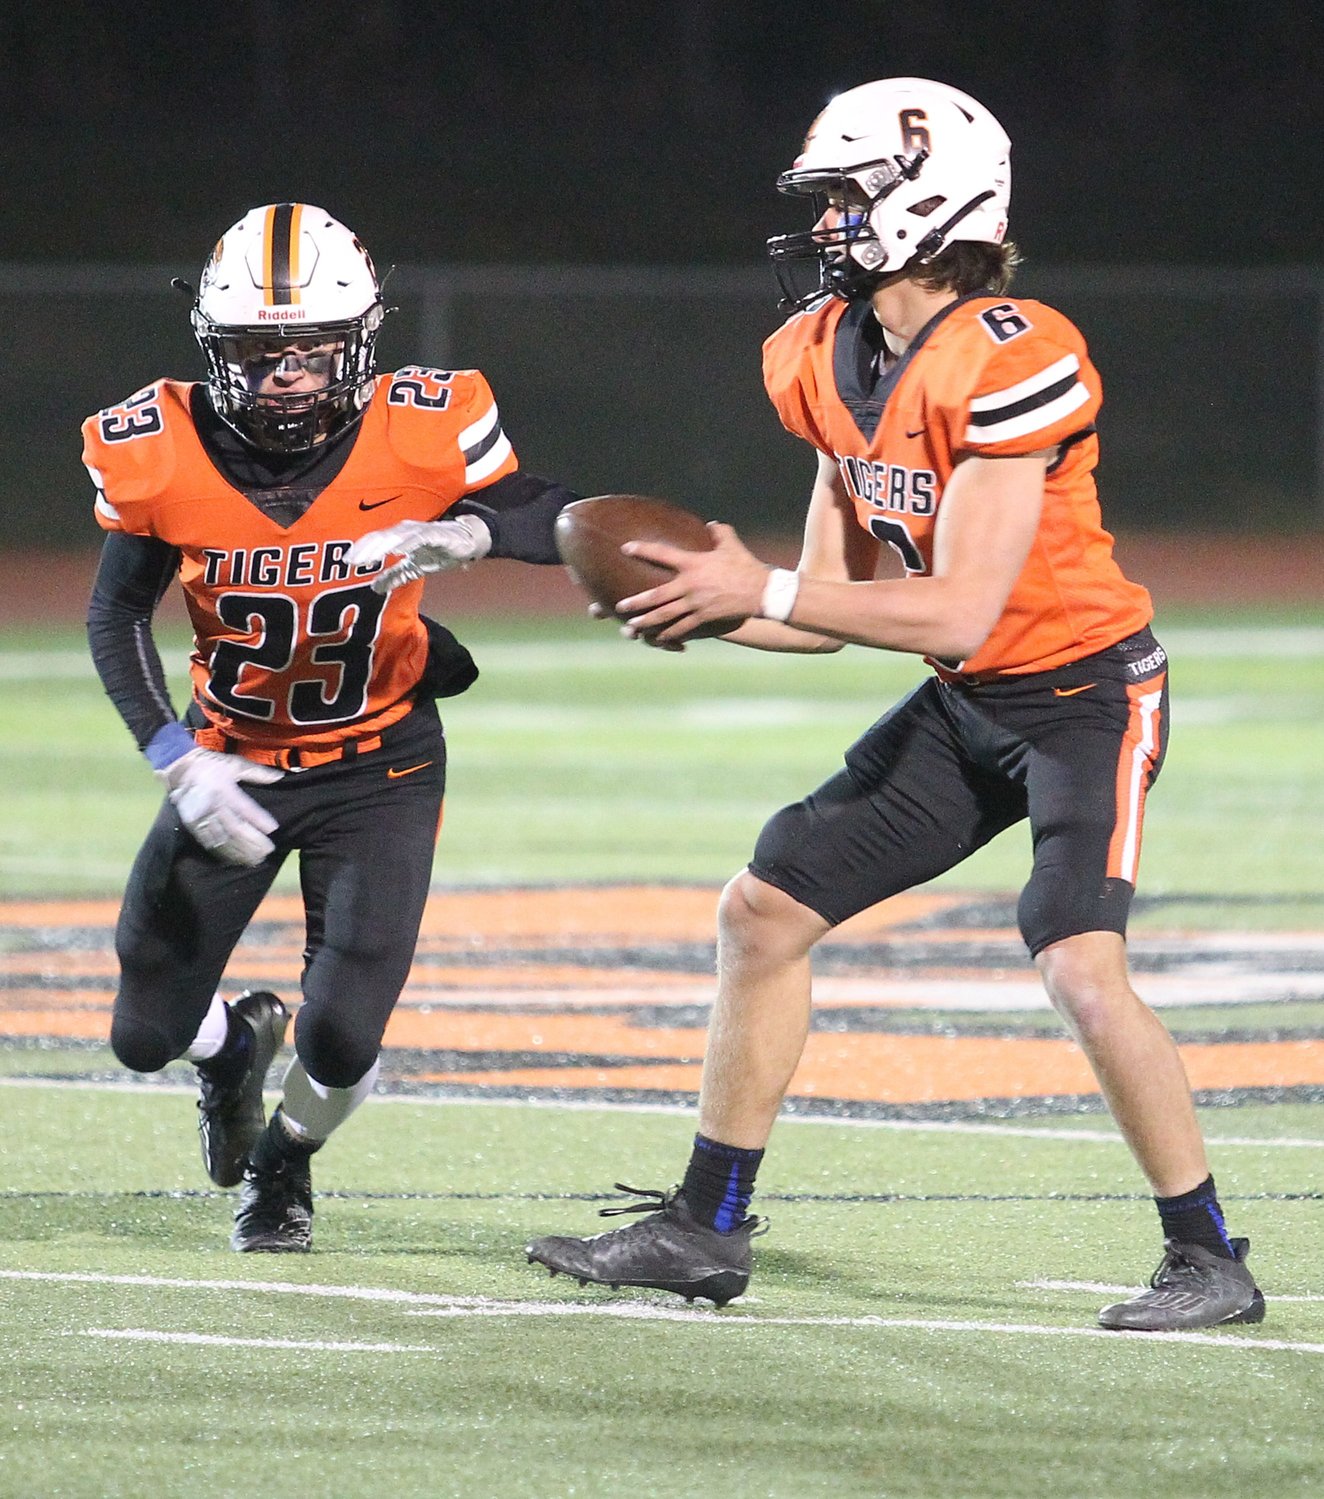 Photos from Friday's football game where Kirksville beat Fulton 33-0